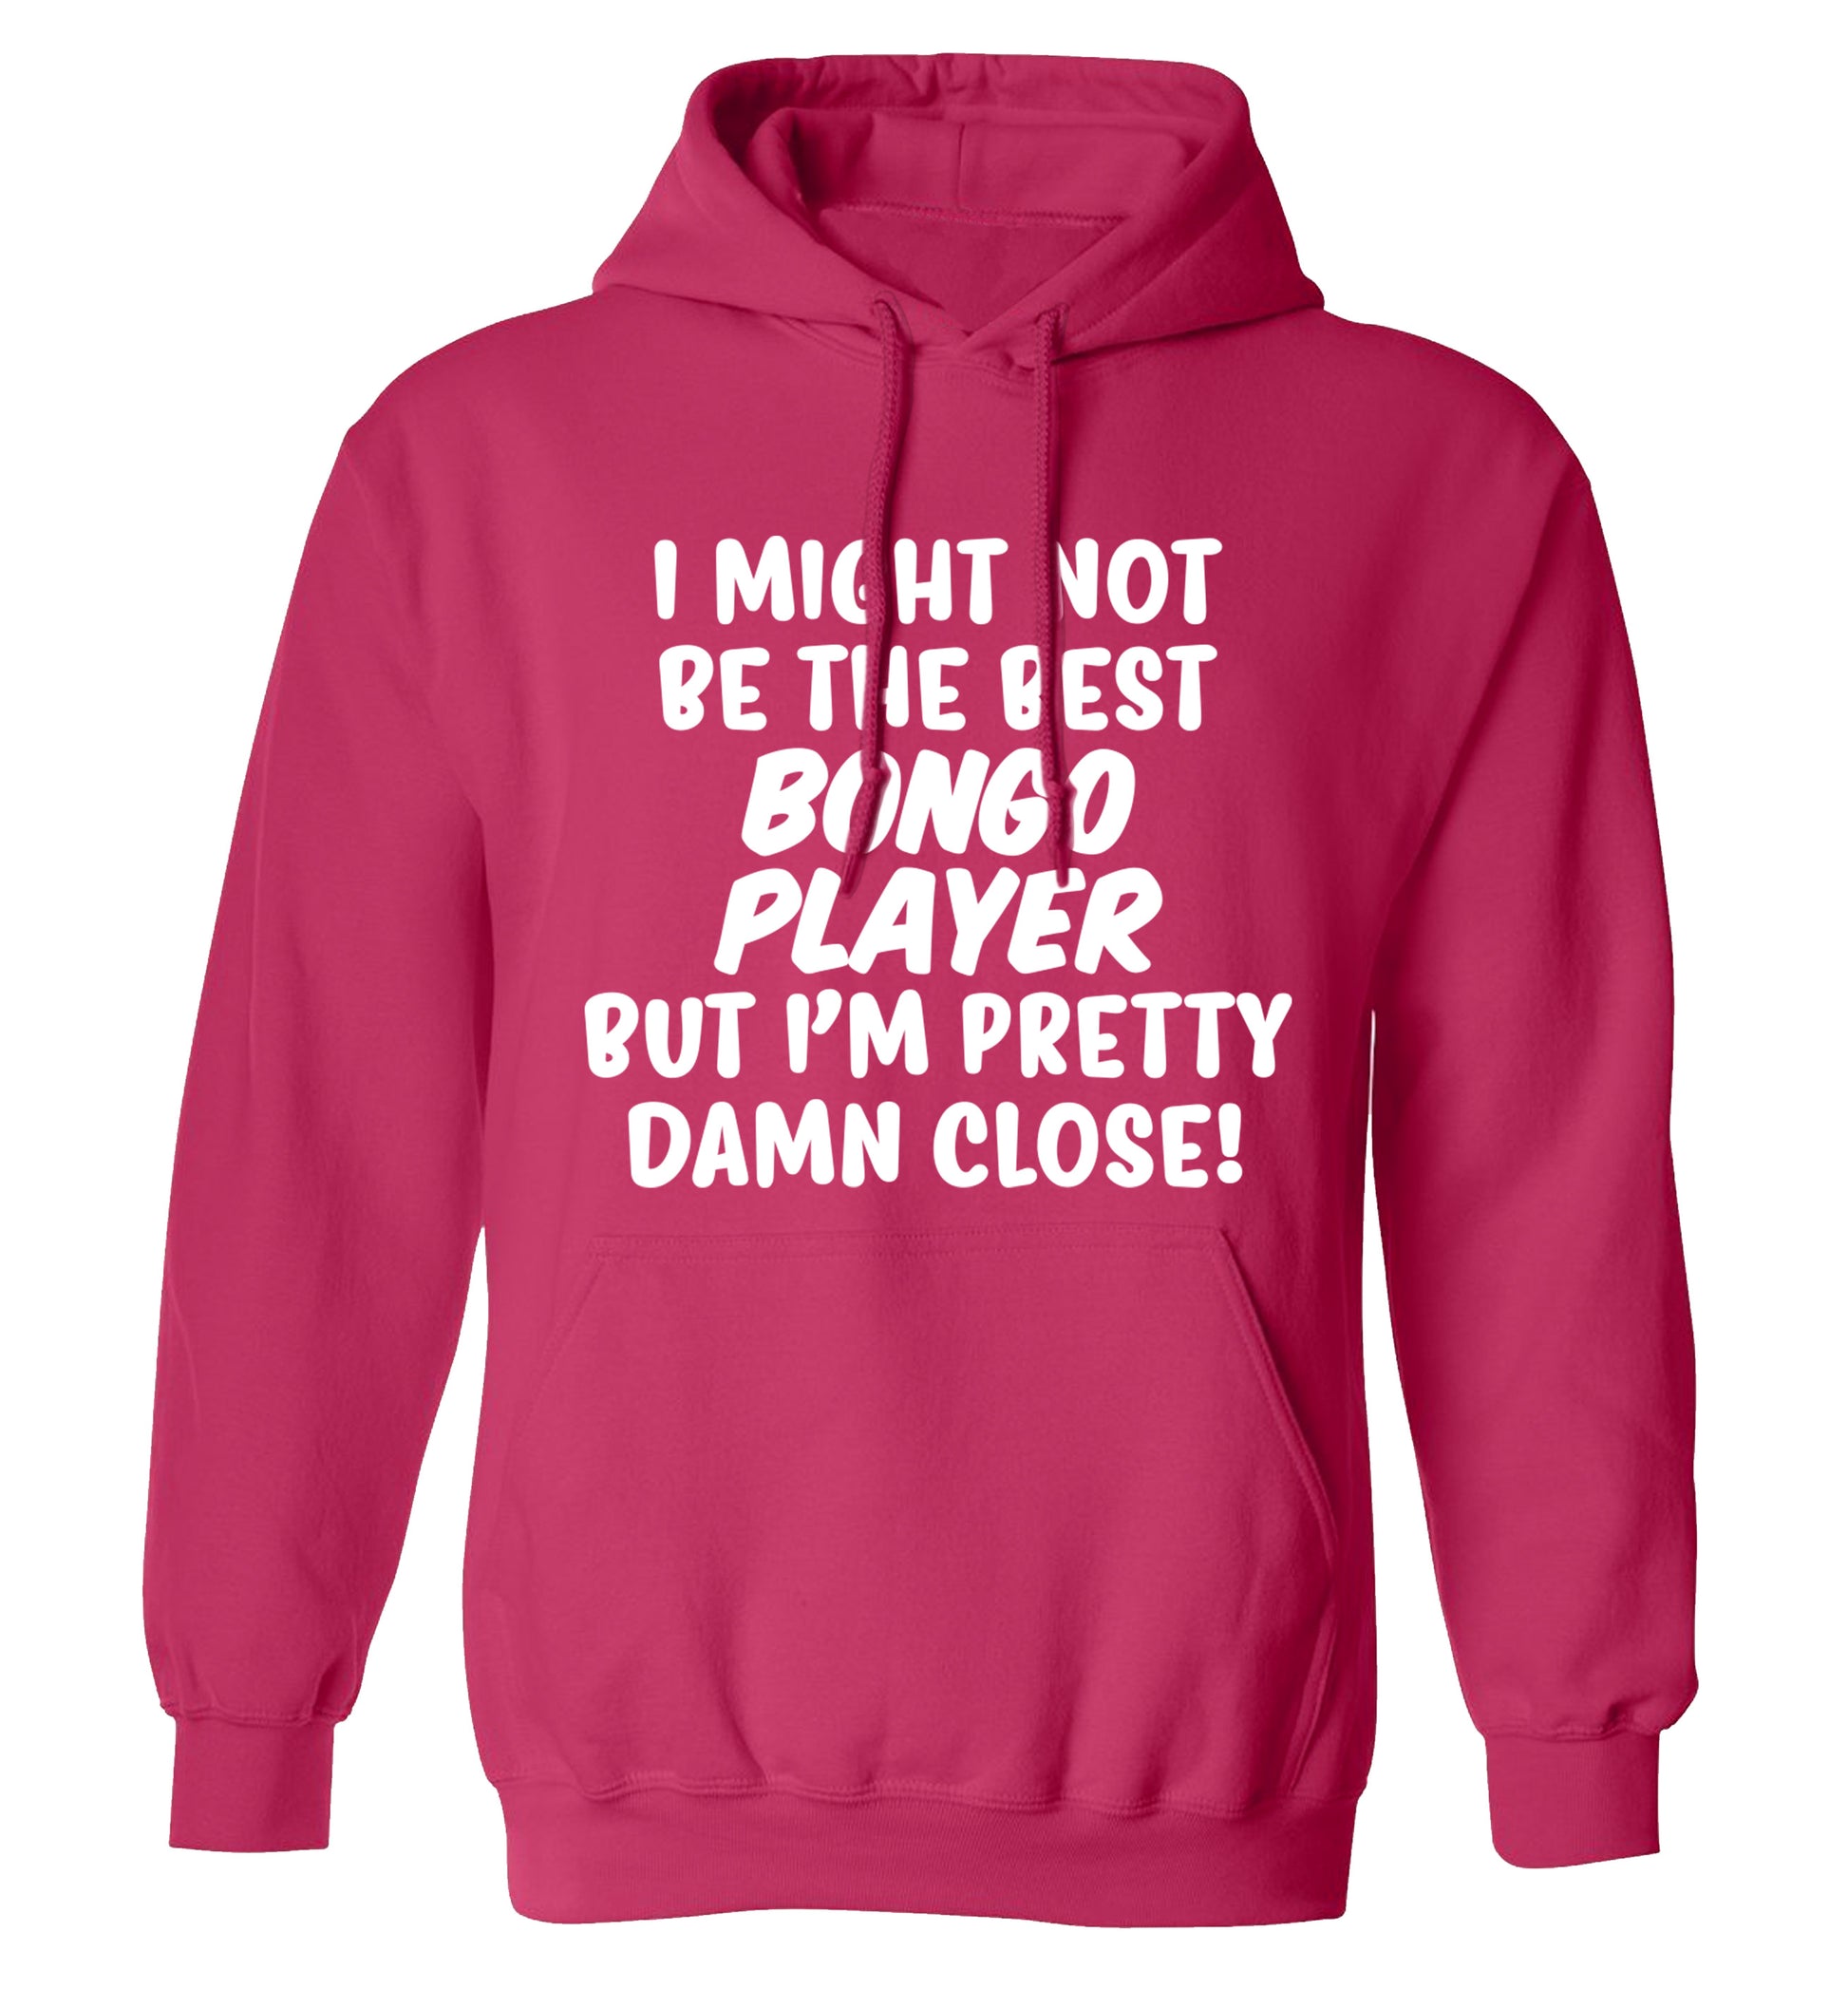 I might not be the best bongo player but I'm pretty close! adults unisexpink hoodie 2XL